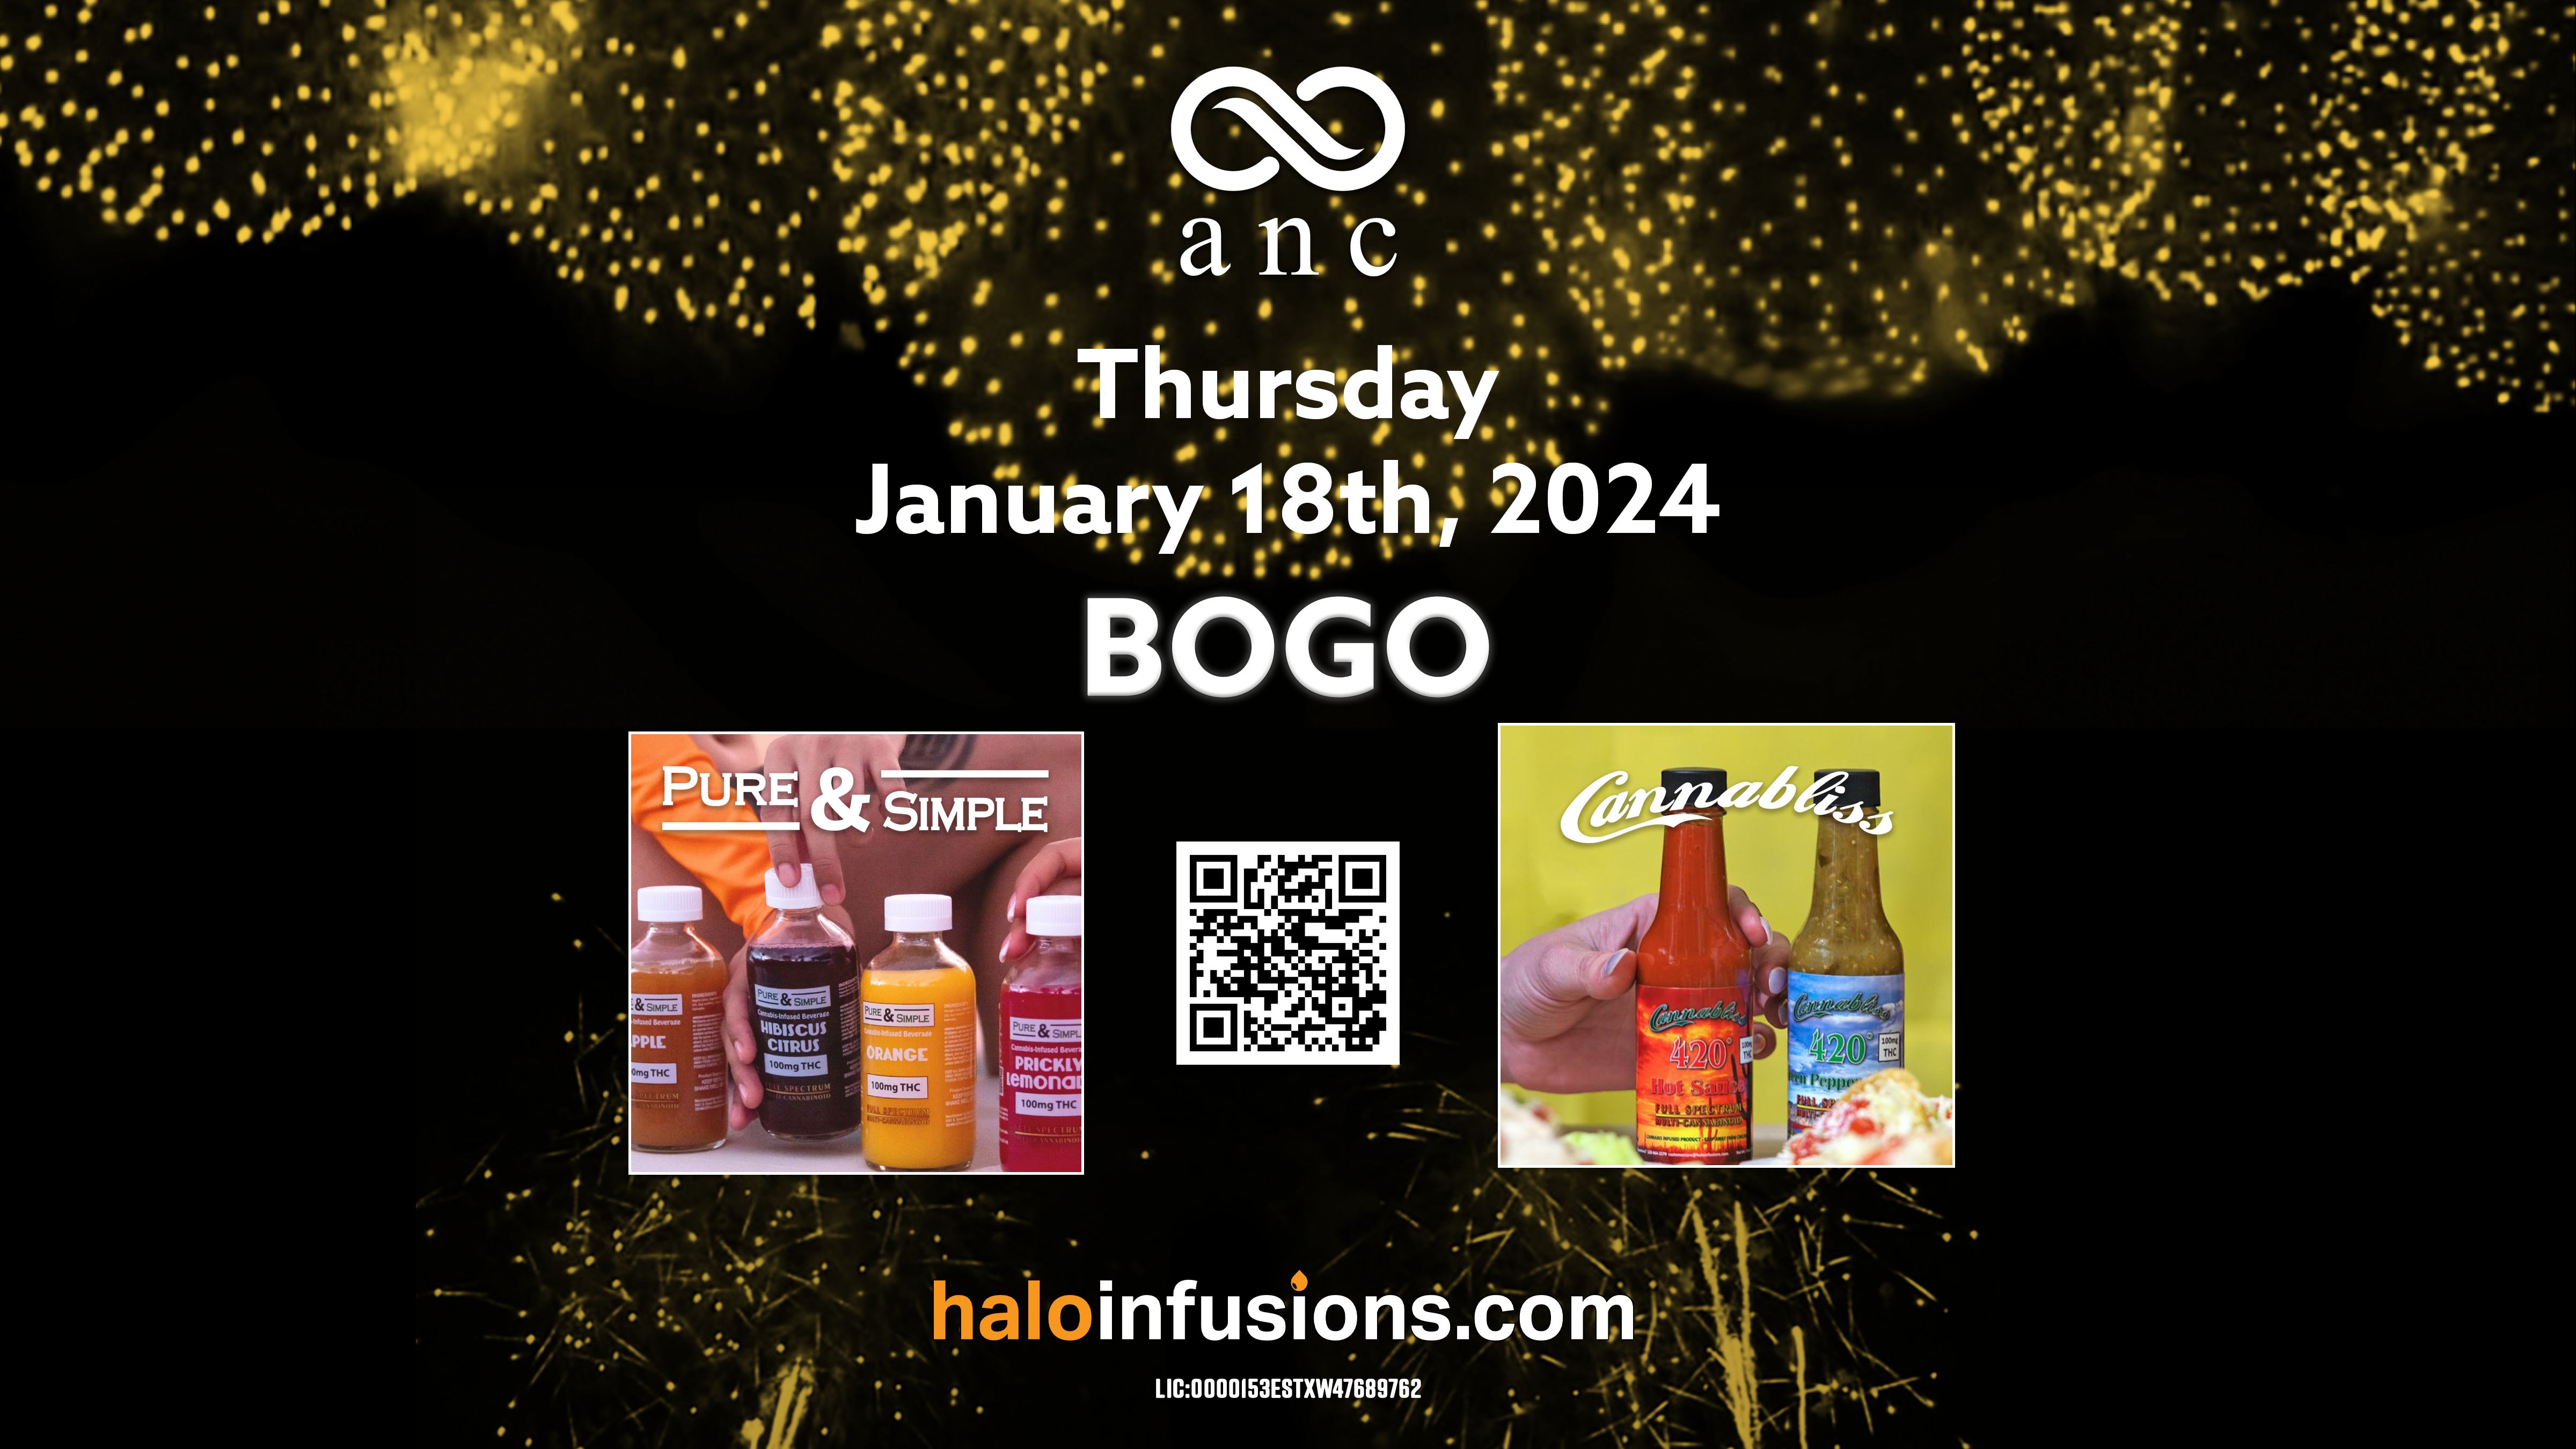 ANC Jan 18th BOGO on Halo Infusions. January 2024 dispensary specials